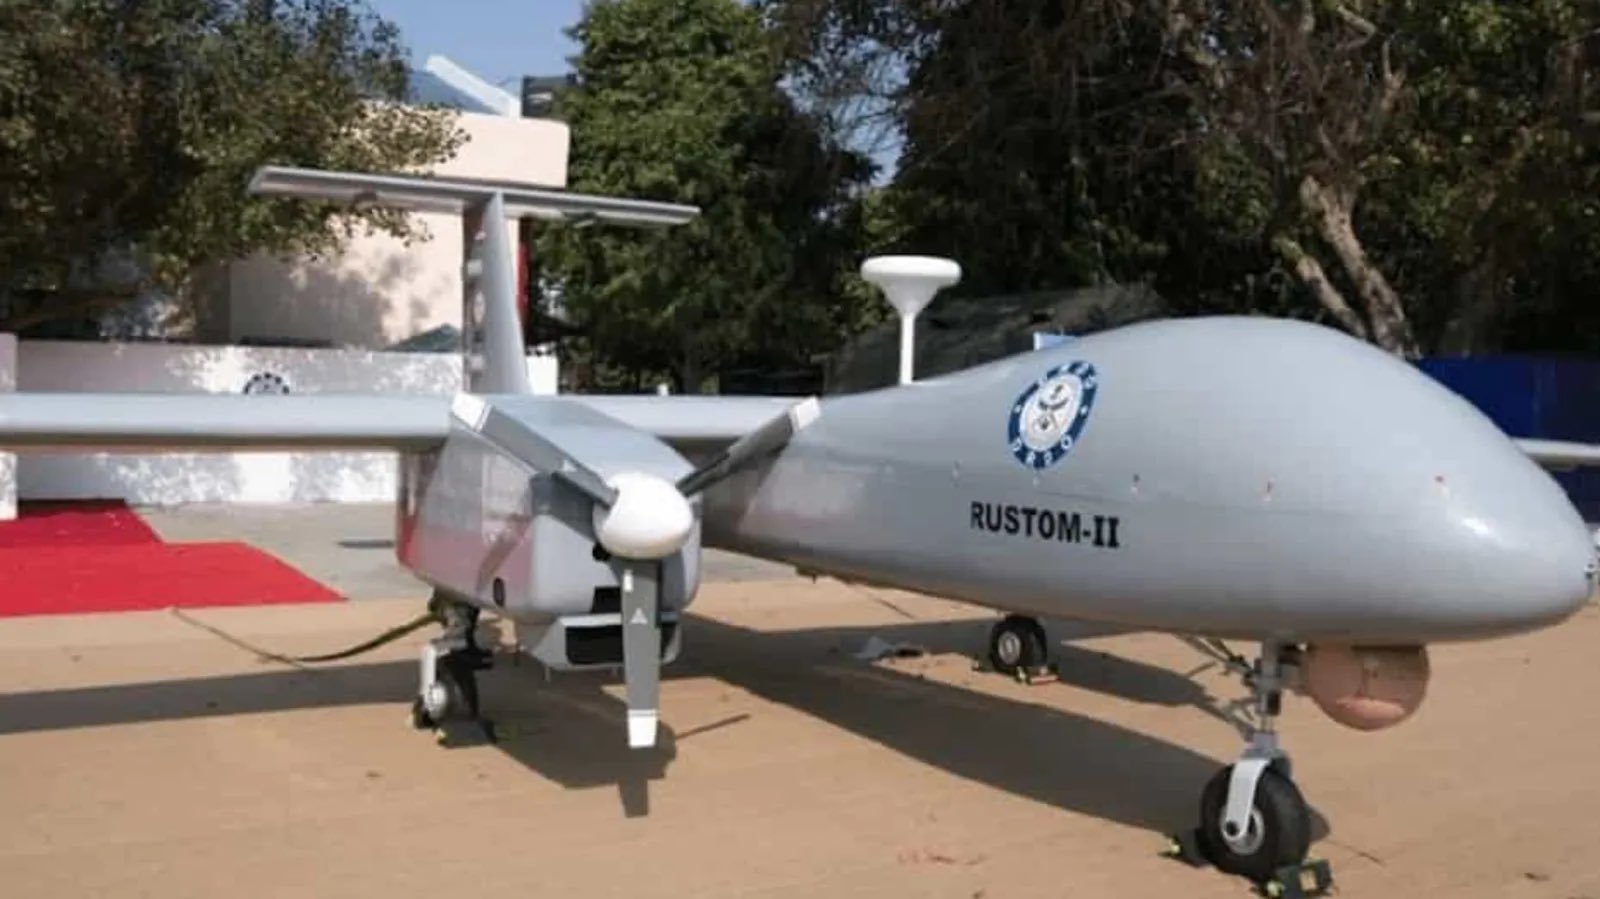 Armenia asked India about buying drones, Indian media report